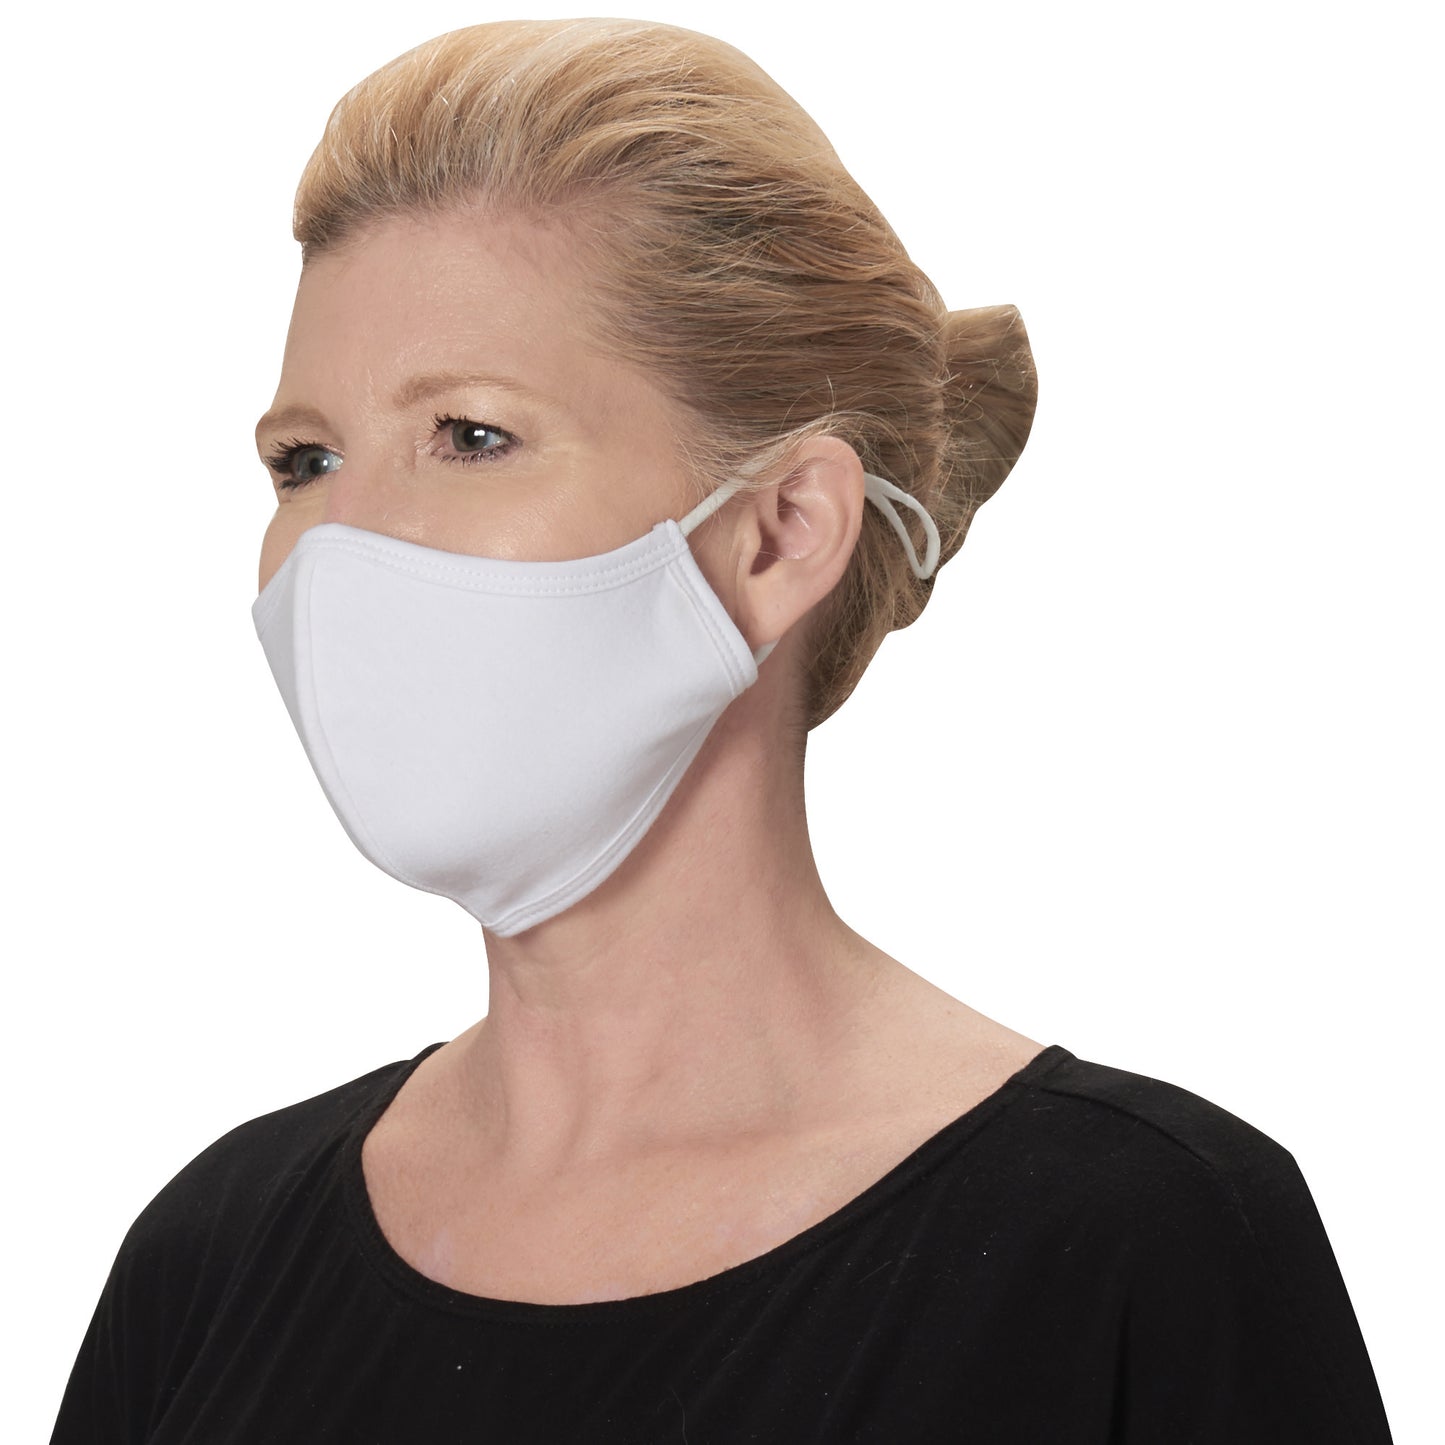 MSK-2WML - Reusable & Adjustable Face Mask, 2-Ply Cotton